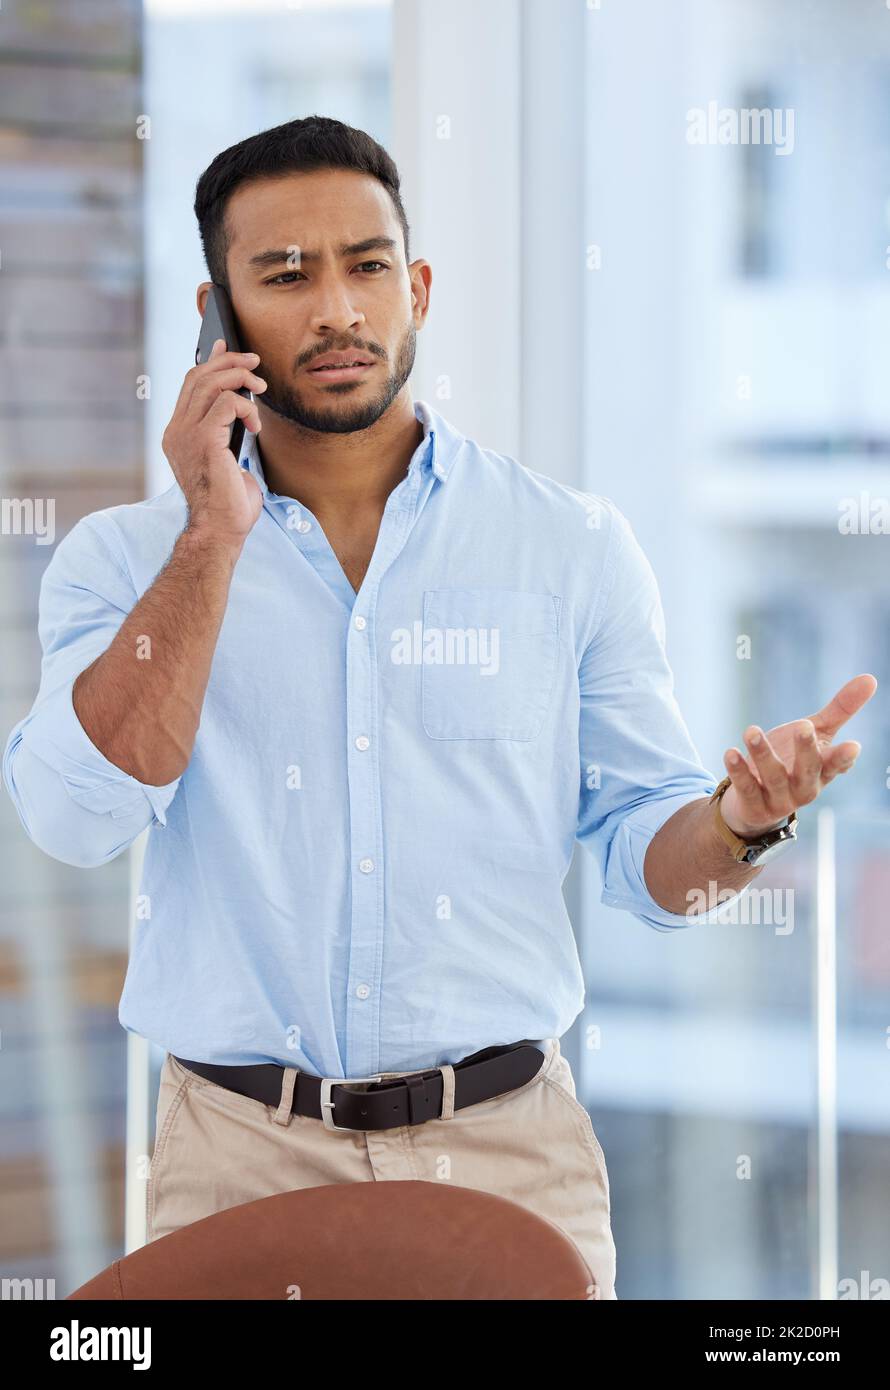 How much longer do I have to wait for an update. Shot of a young businessman talking on a cellphone in an office. Stock Photo